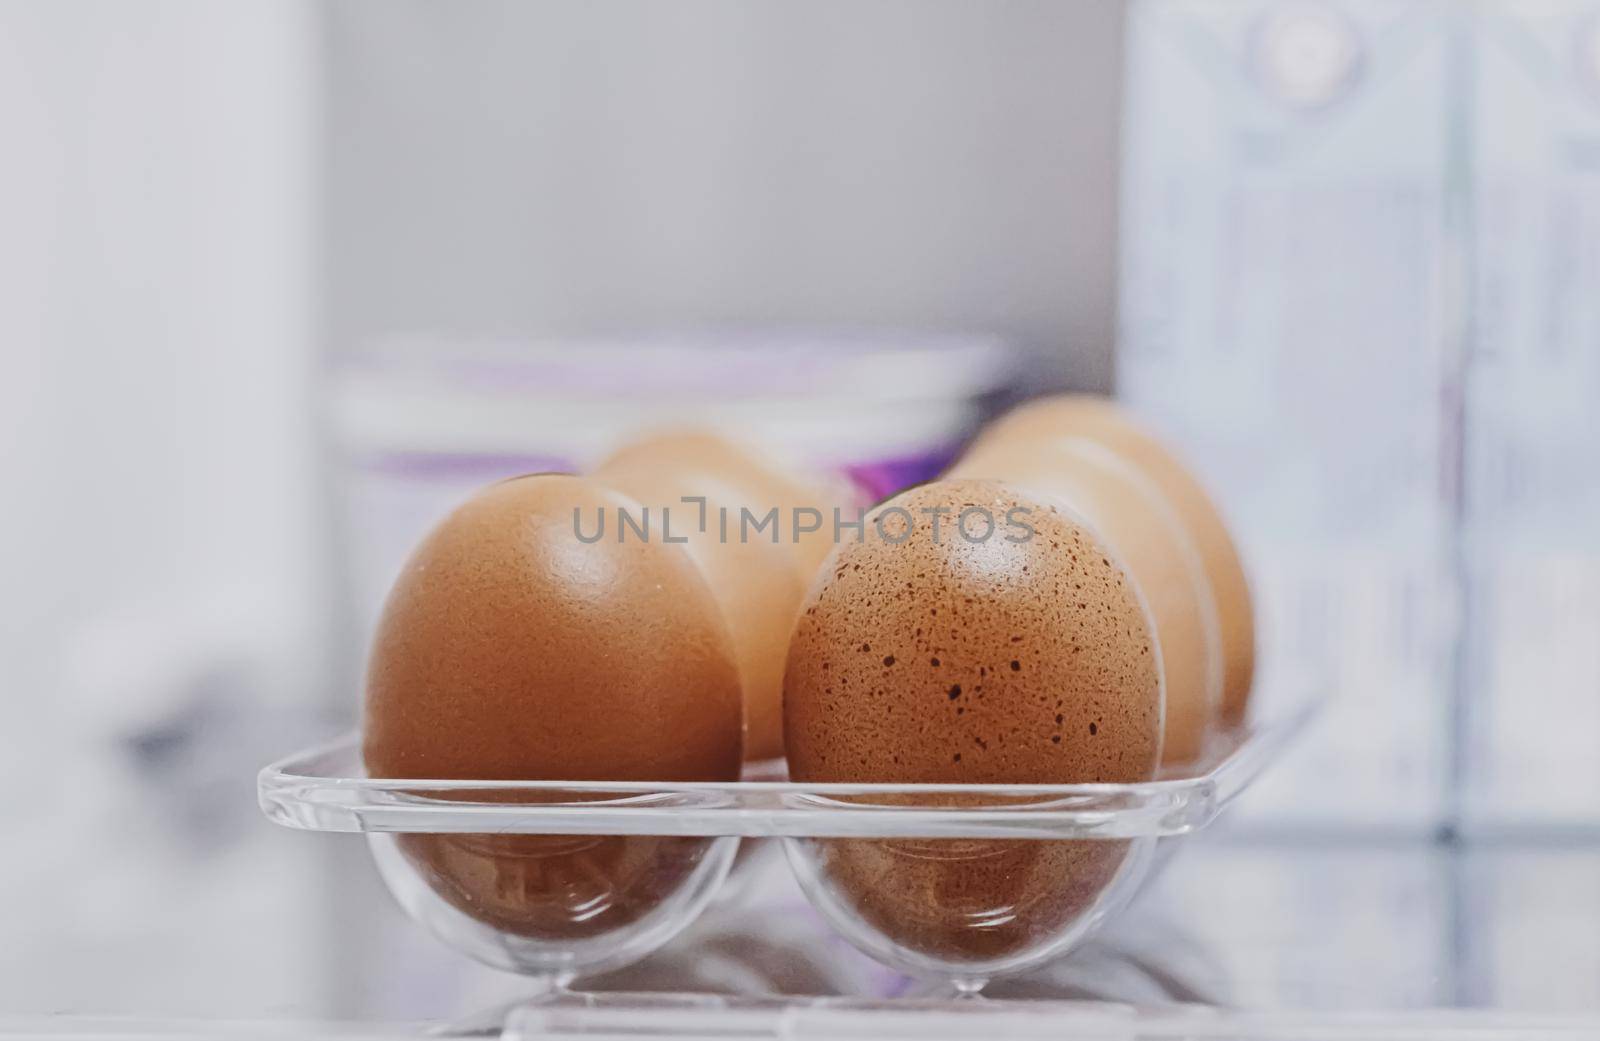 fresh eggs in refrigerator, dairy product closeup